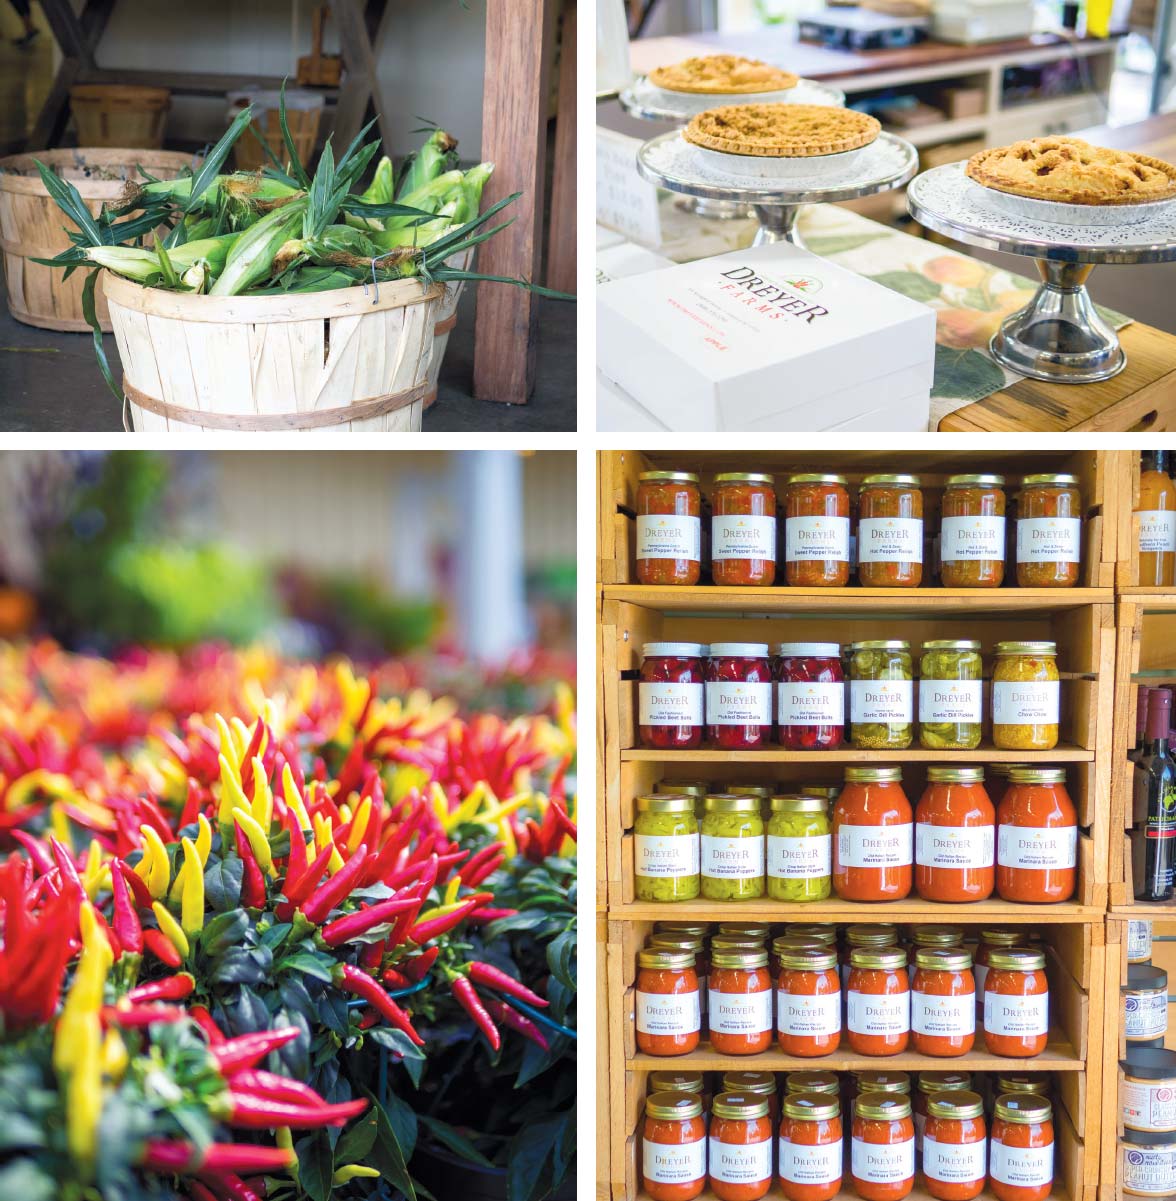 clockwise from left: barrel of unshucked corn; selection of Dreyer Farms pies; selection of Dreyer Farms canned goods arranged on shelves; red and yellow peppers